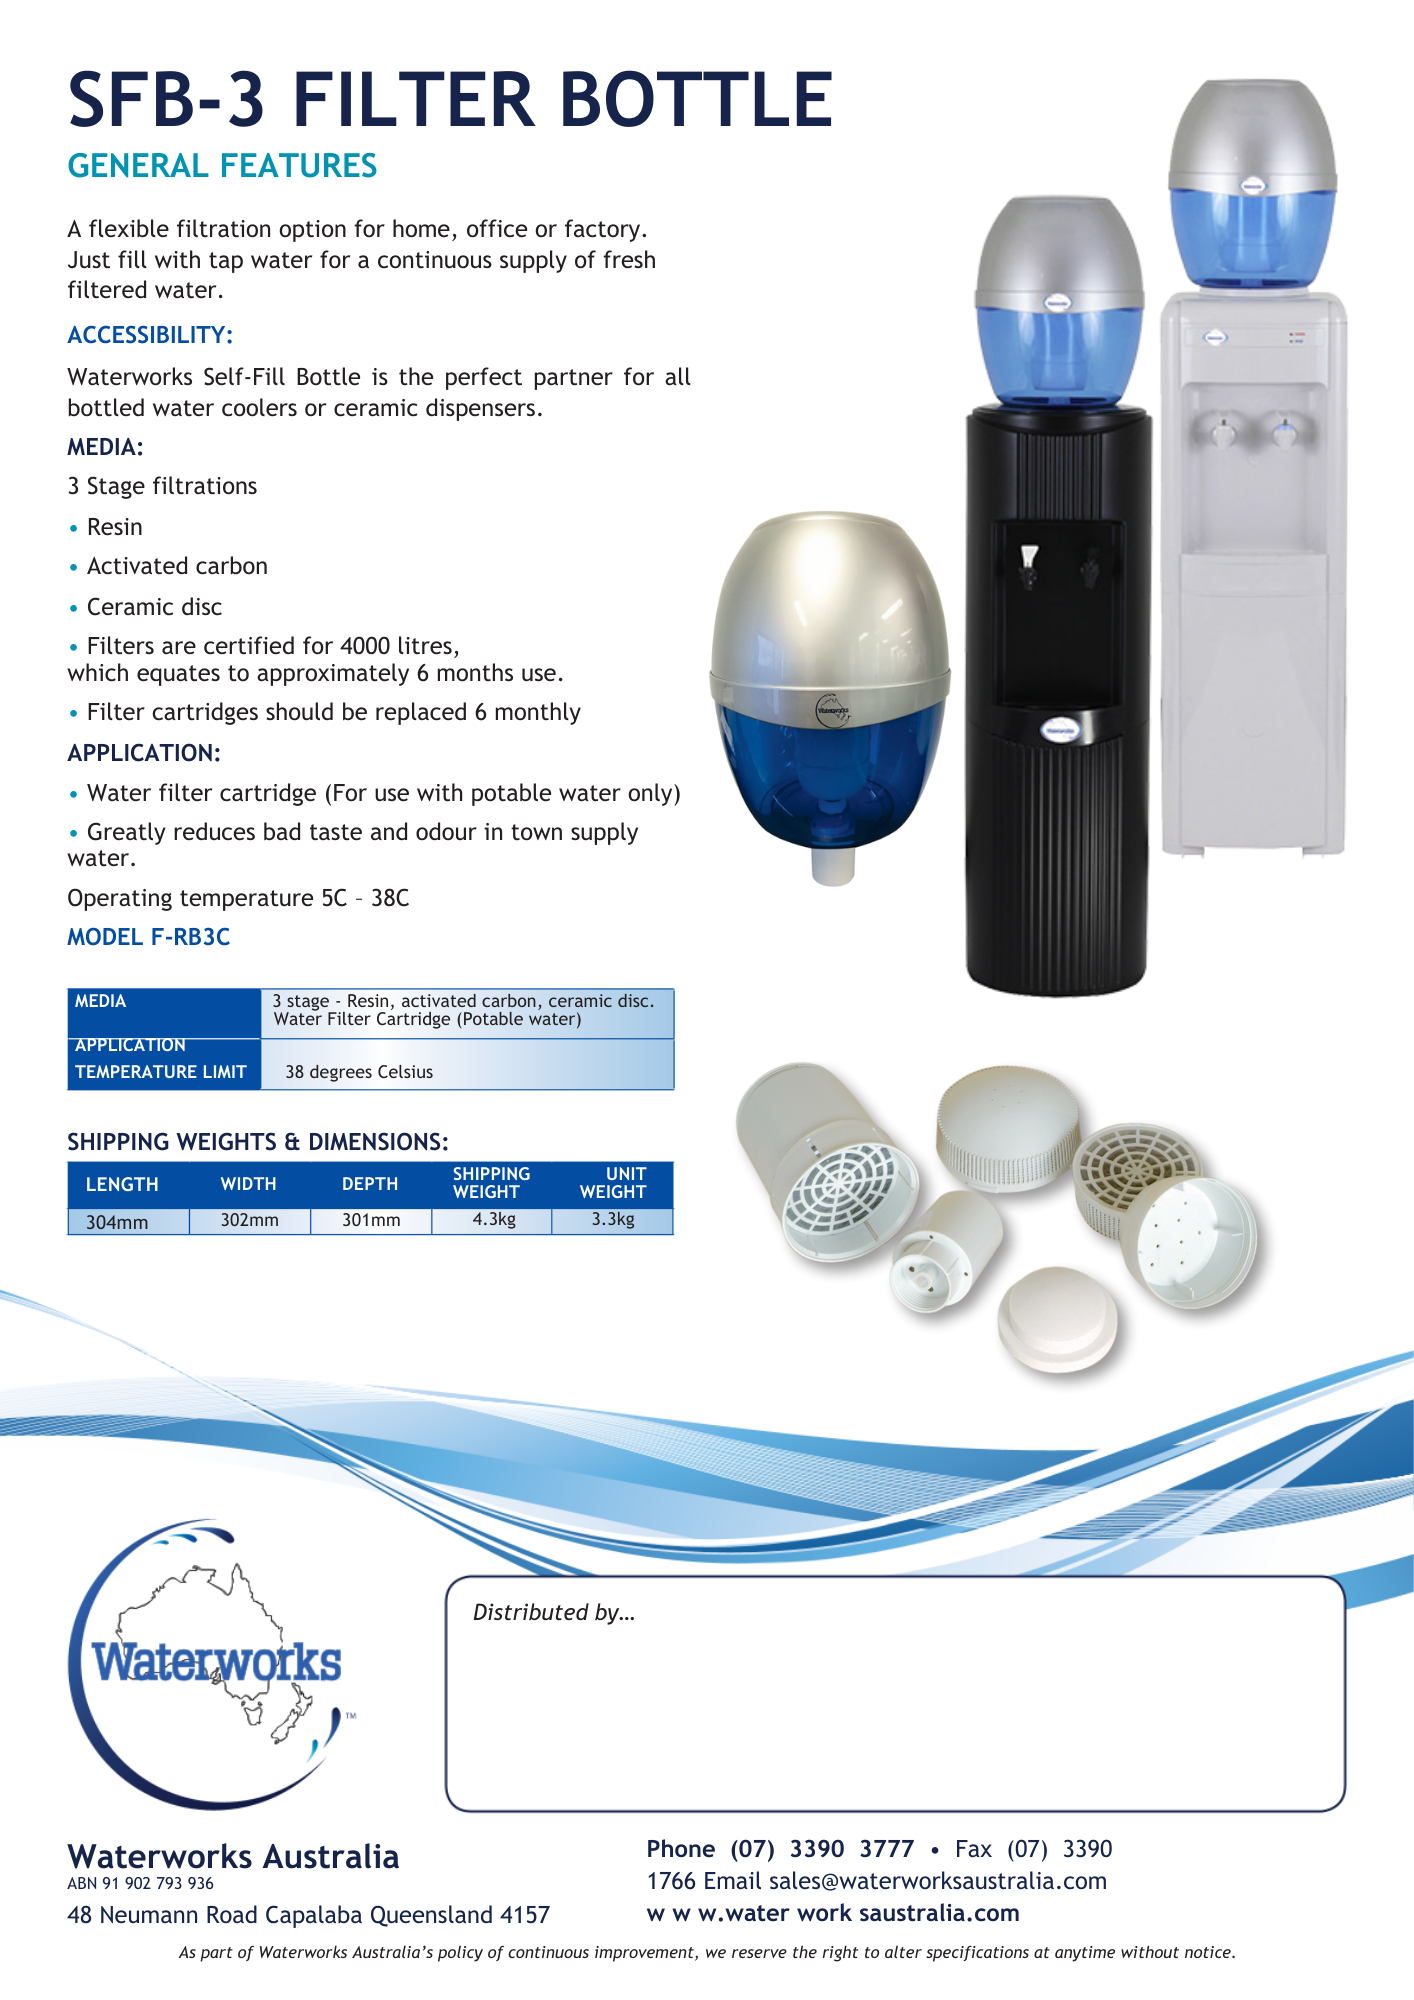 WATERWORKS™ - Self-fill Filter Bottle (SFB 3F) - Awesome Water